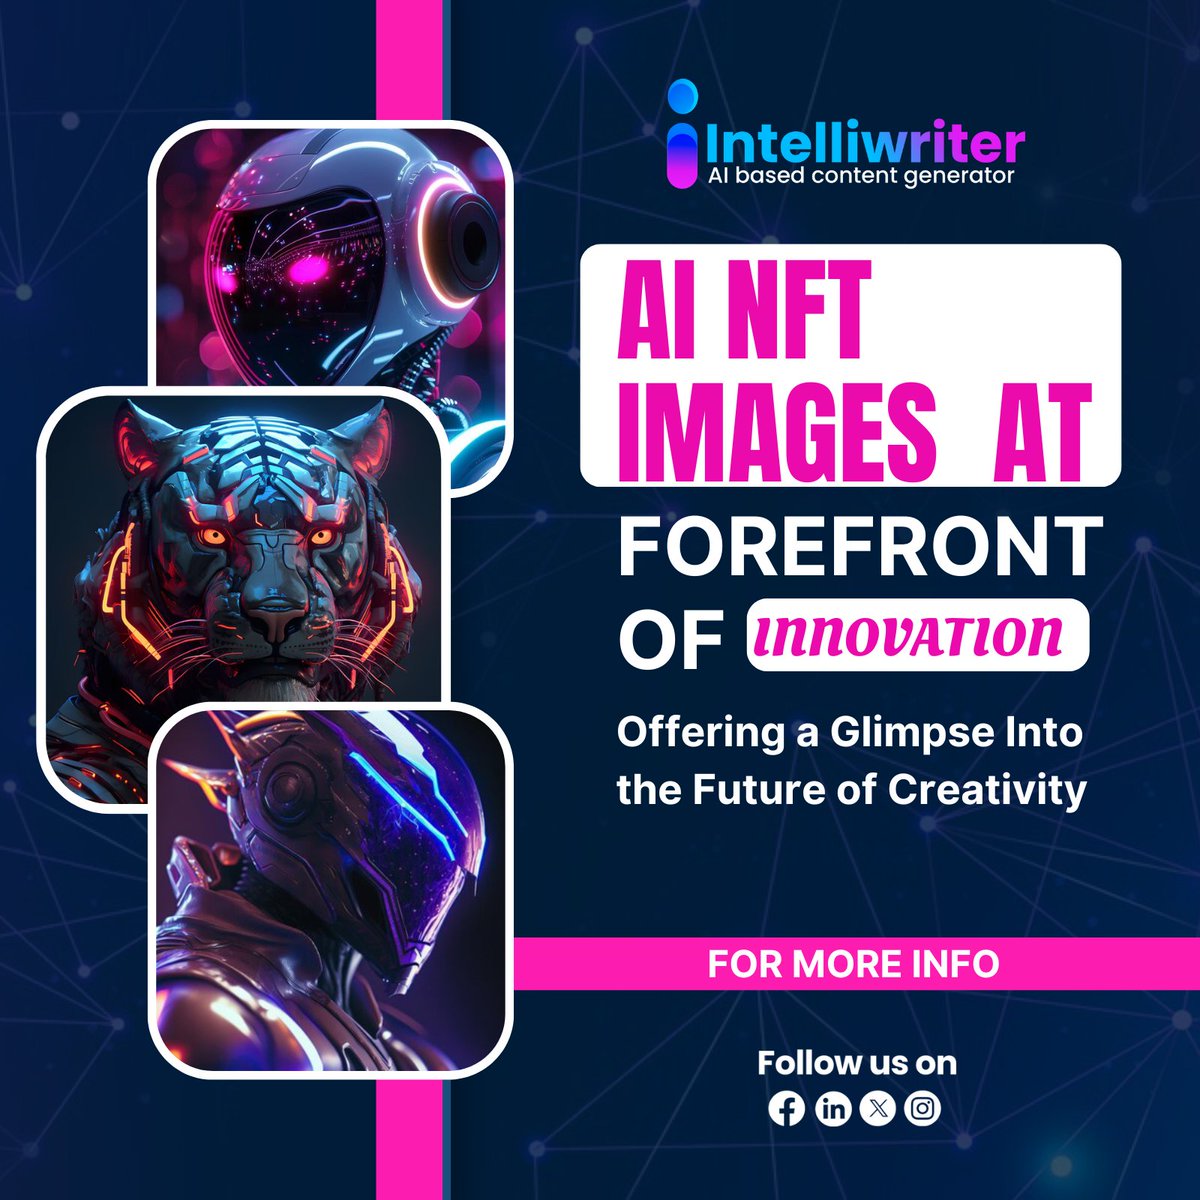 Intelliwriter isn't just a tool—it's a gateway to a new era of innovation in content generation.💥

Join the forefront of innovation and unlock limitless creative possibilities today!🔓

intelliwriter.io
#IntelliWriter #AIbasedcontentgenerator #AIImagegenerator #NFTImages